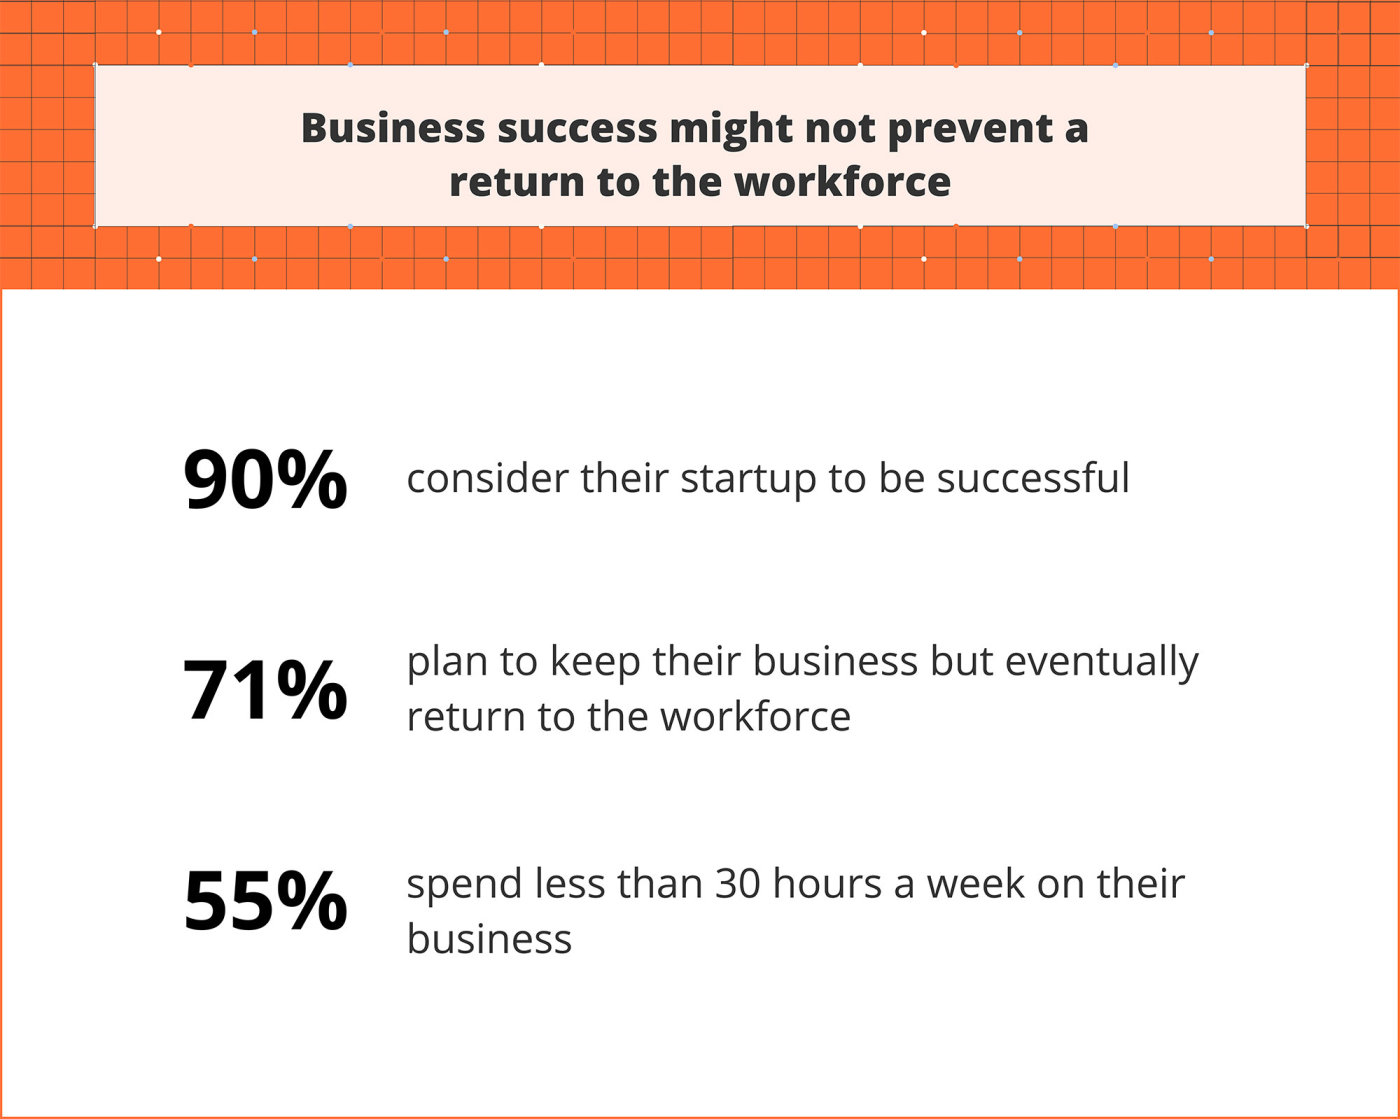 An infographic showing that people might still return to the workforce even if their new businesses are successful (71%)